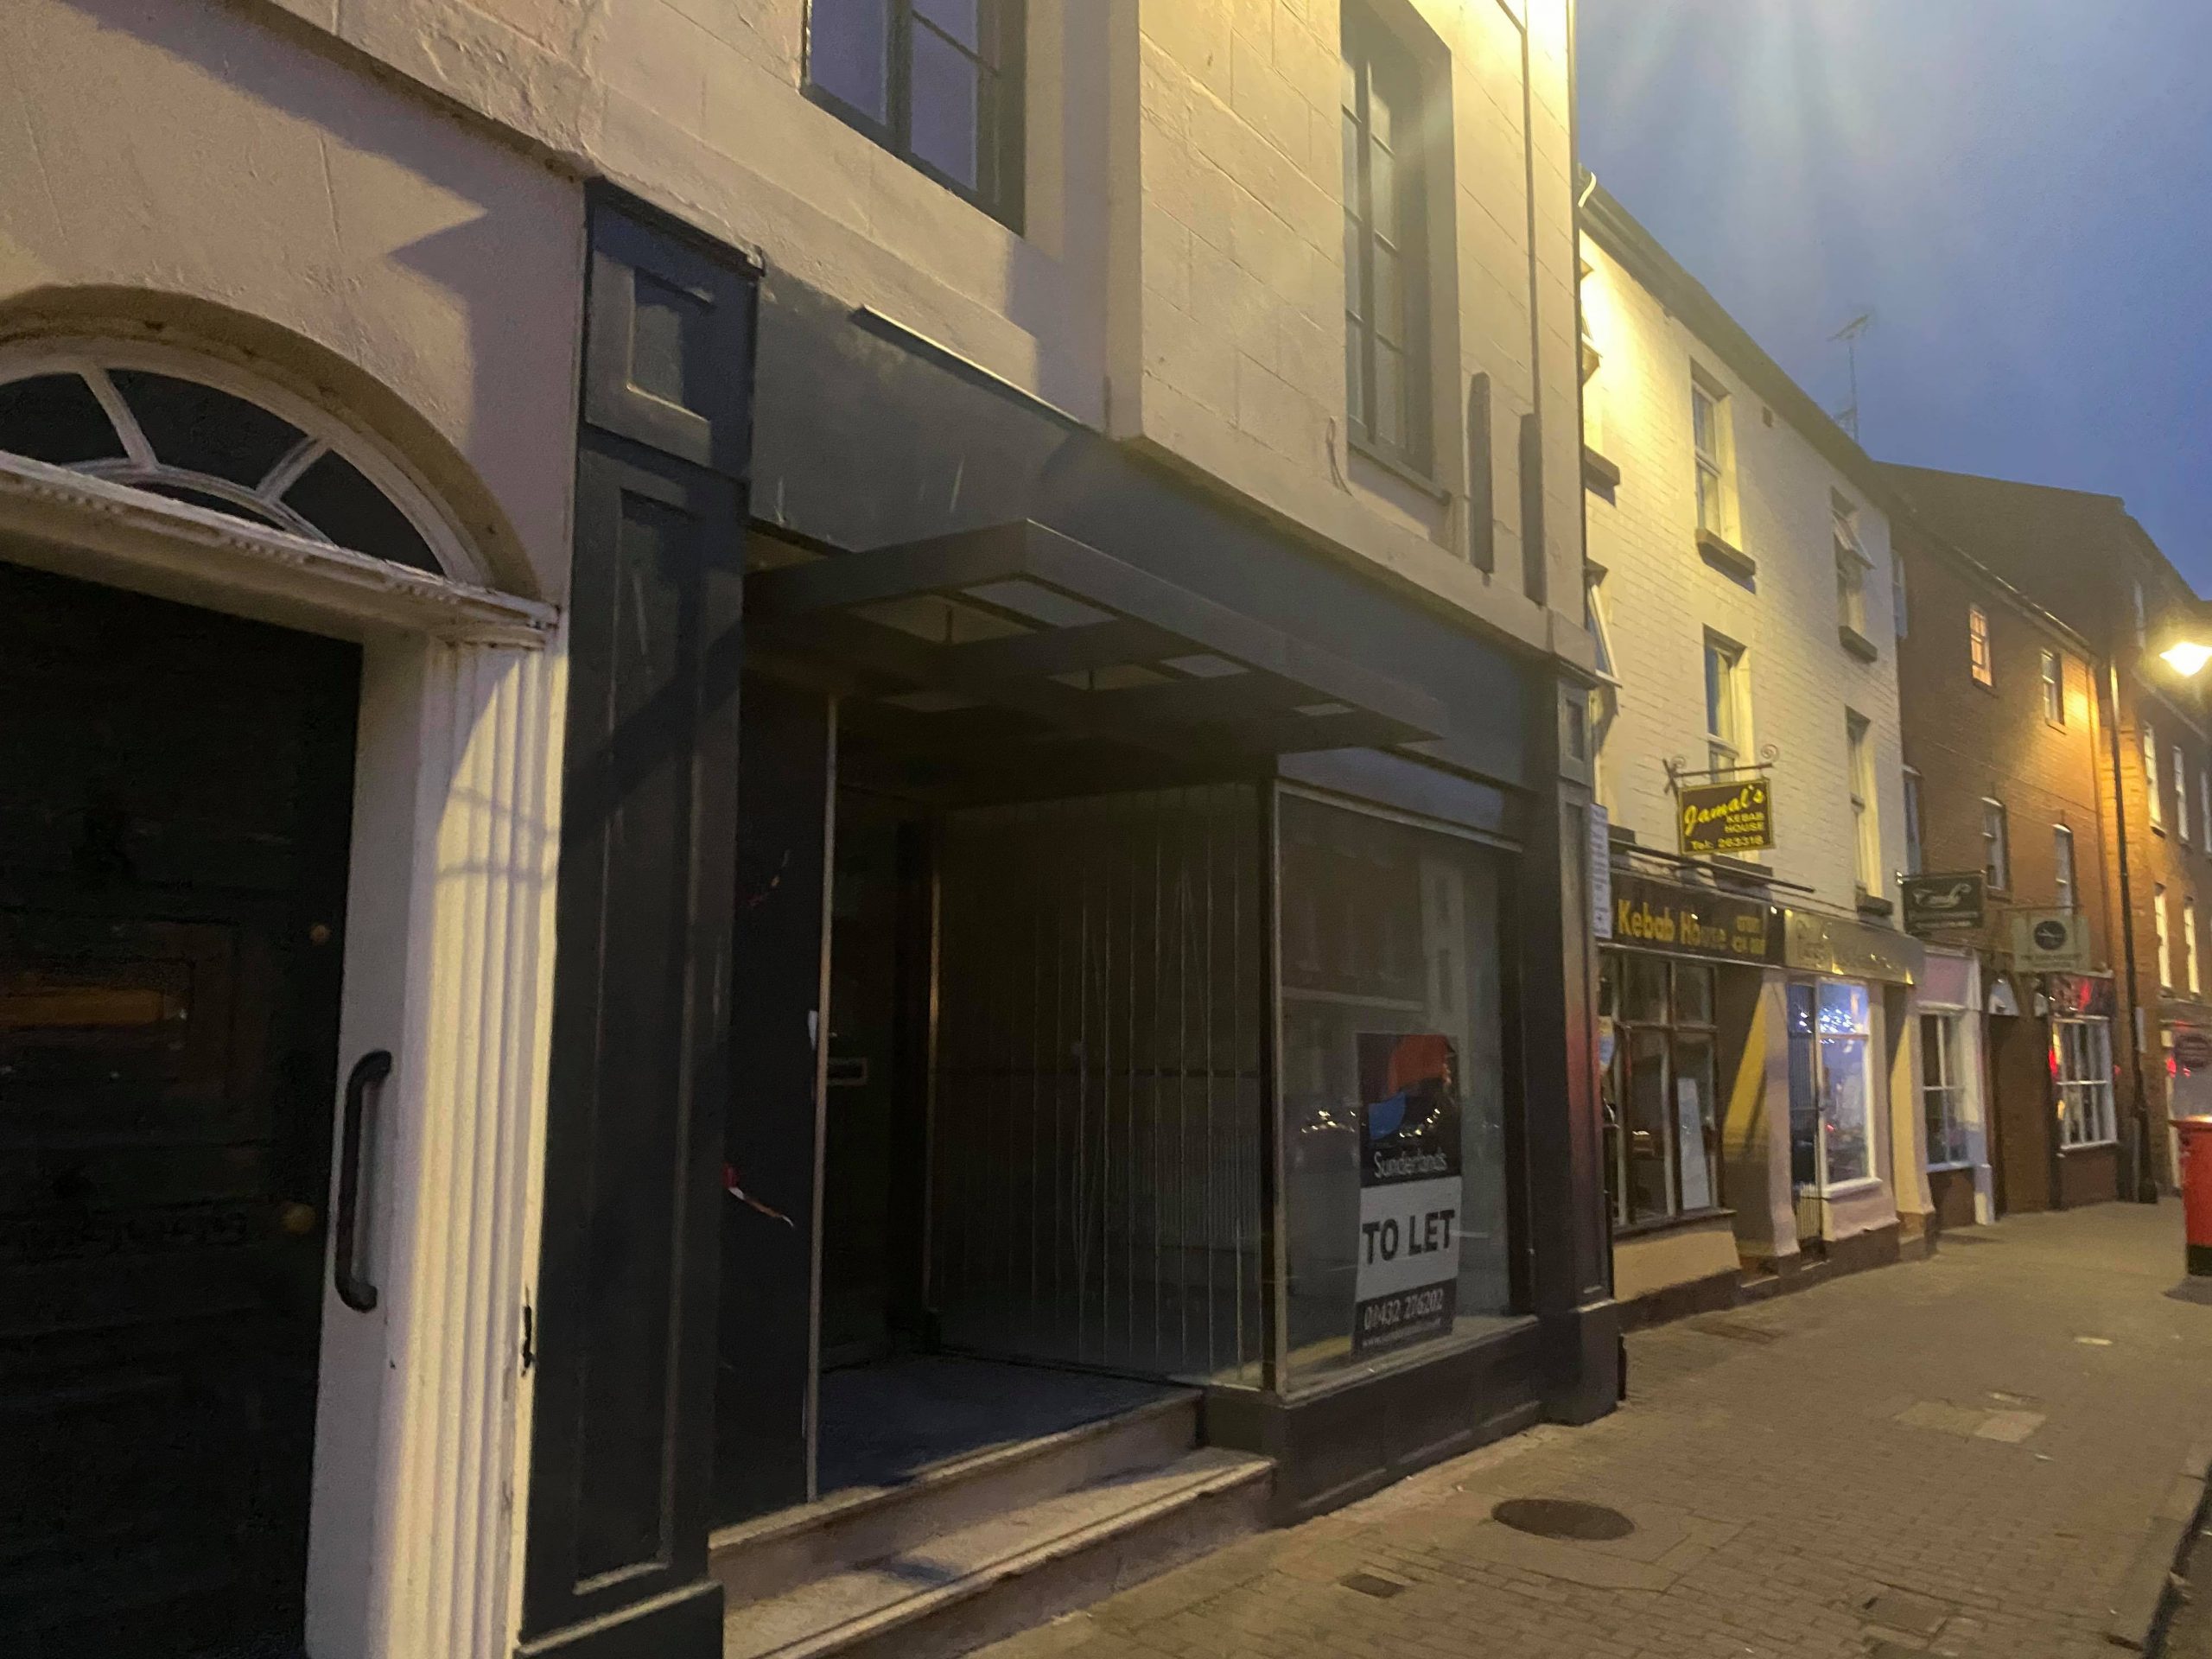 NEWS | Plans for new fish and chip shop on Bridge Street in Hereford progressing well